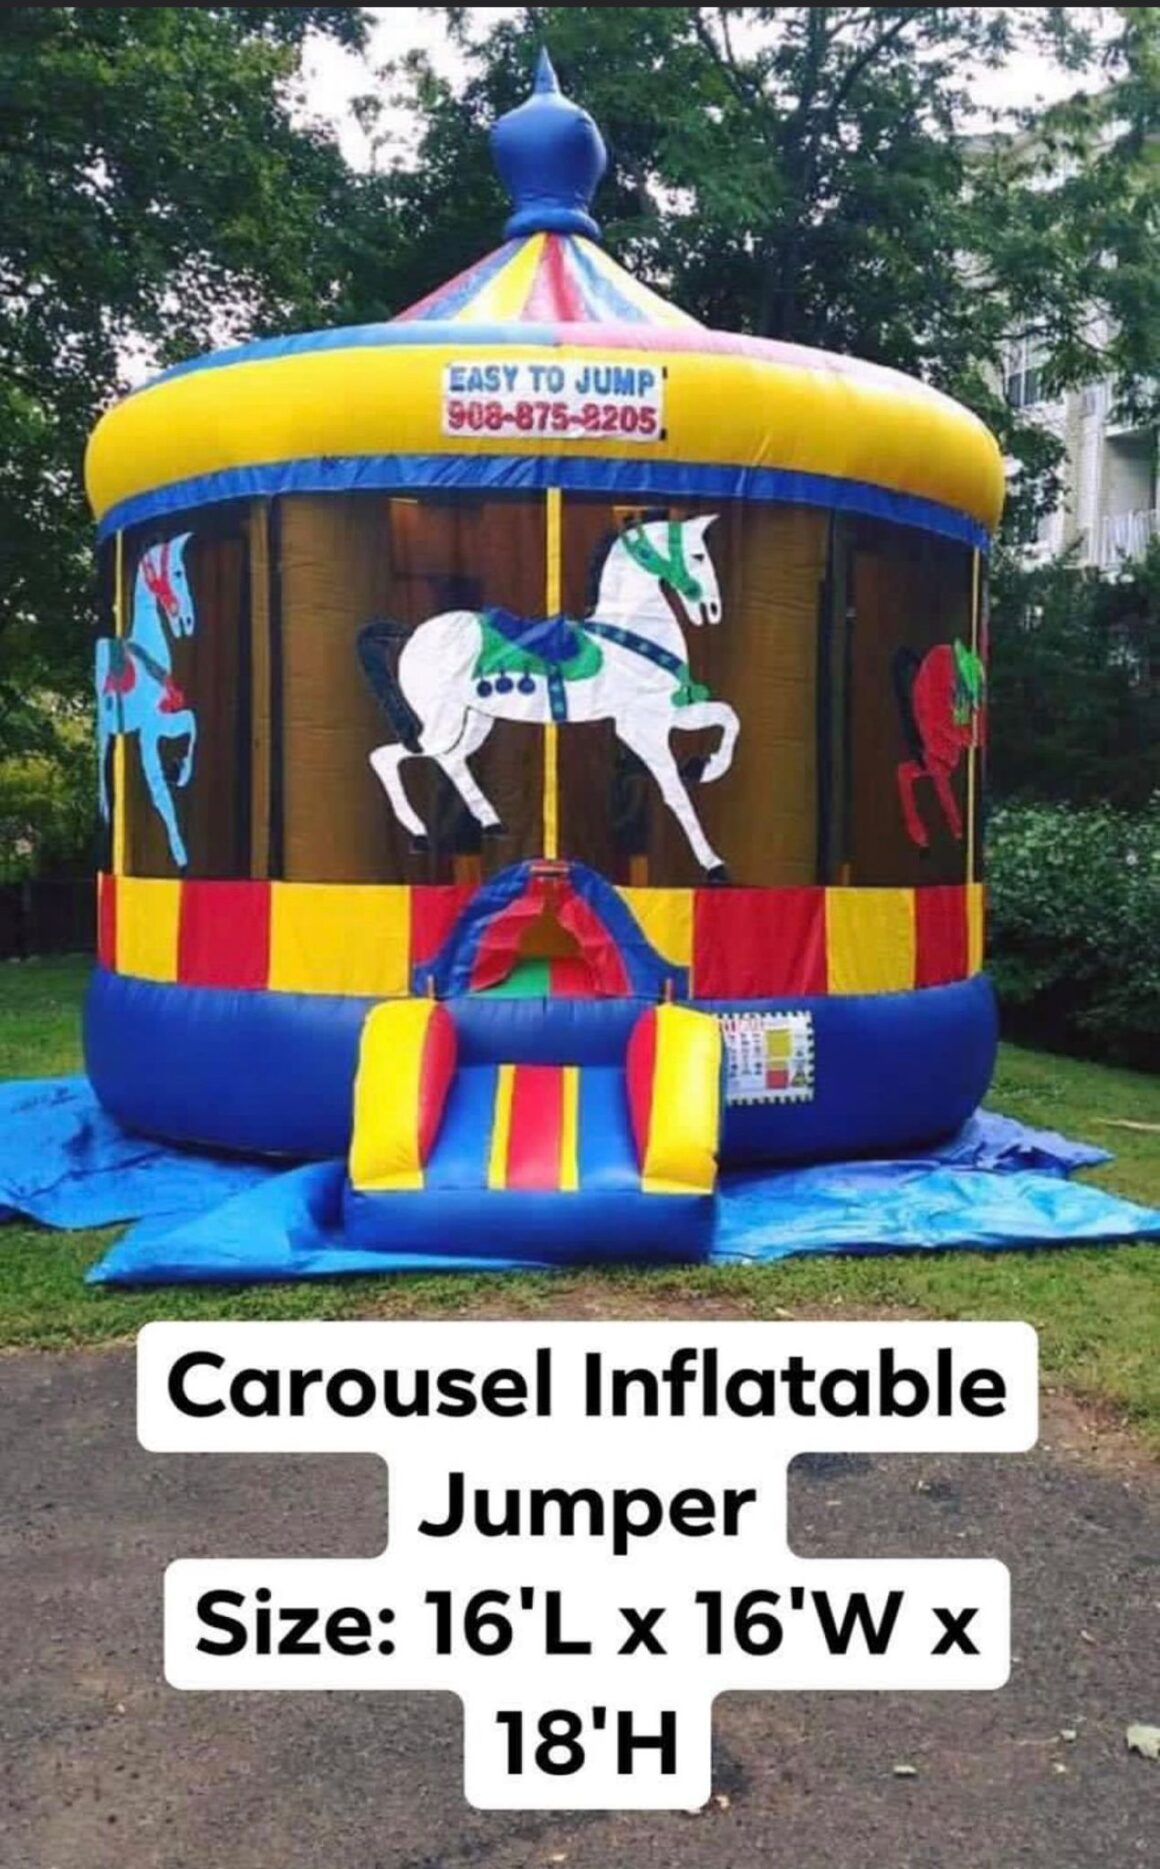 Carousel Inflatable Jumper size 16 L x 16 W x 18 H